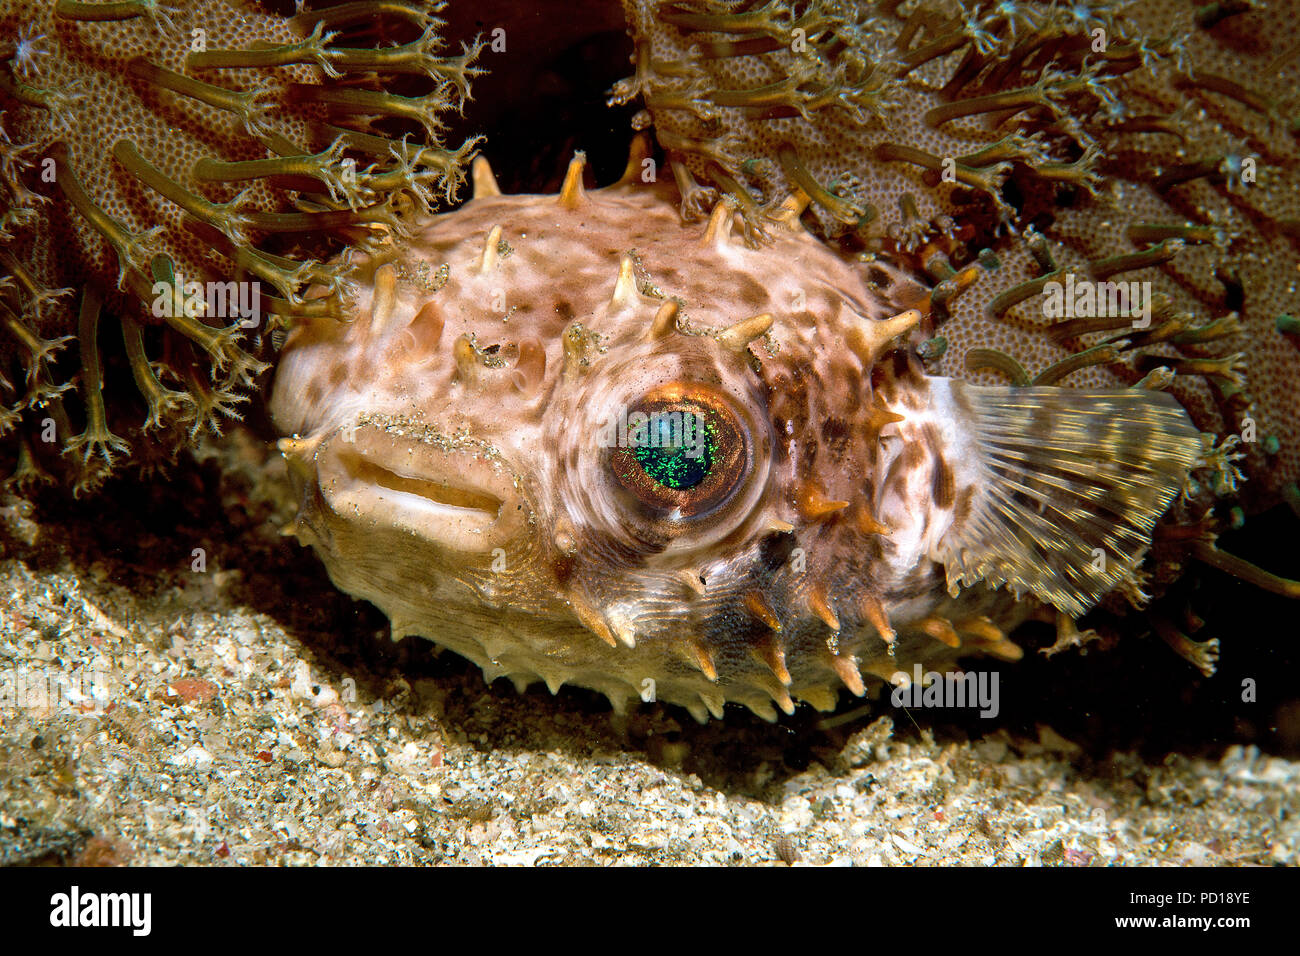 Rounded porcupinefish or Shortspine Porcupinefish (Cyclichthys orbicularis) laying between corals, Komodo island, Indonesia Stock Photo